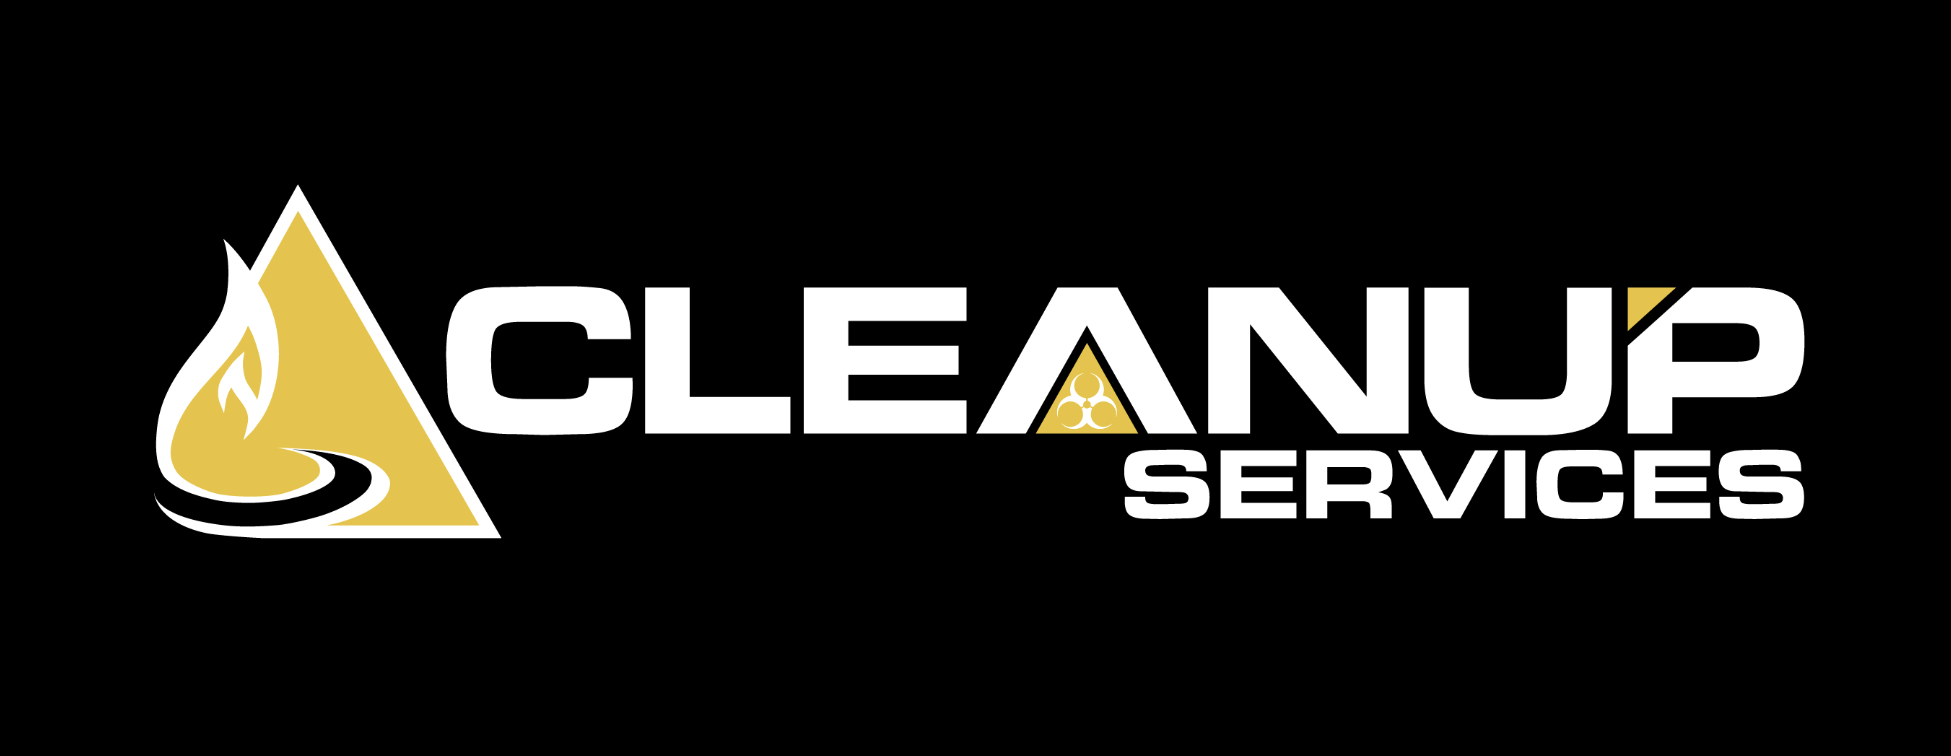 Cleanup Services Logo